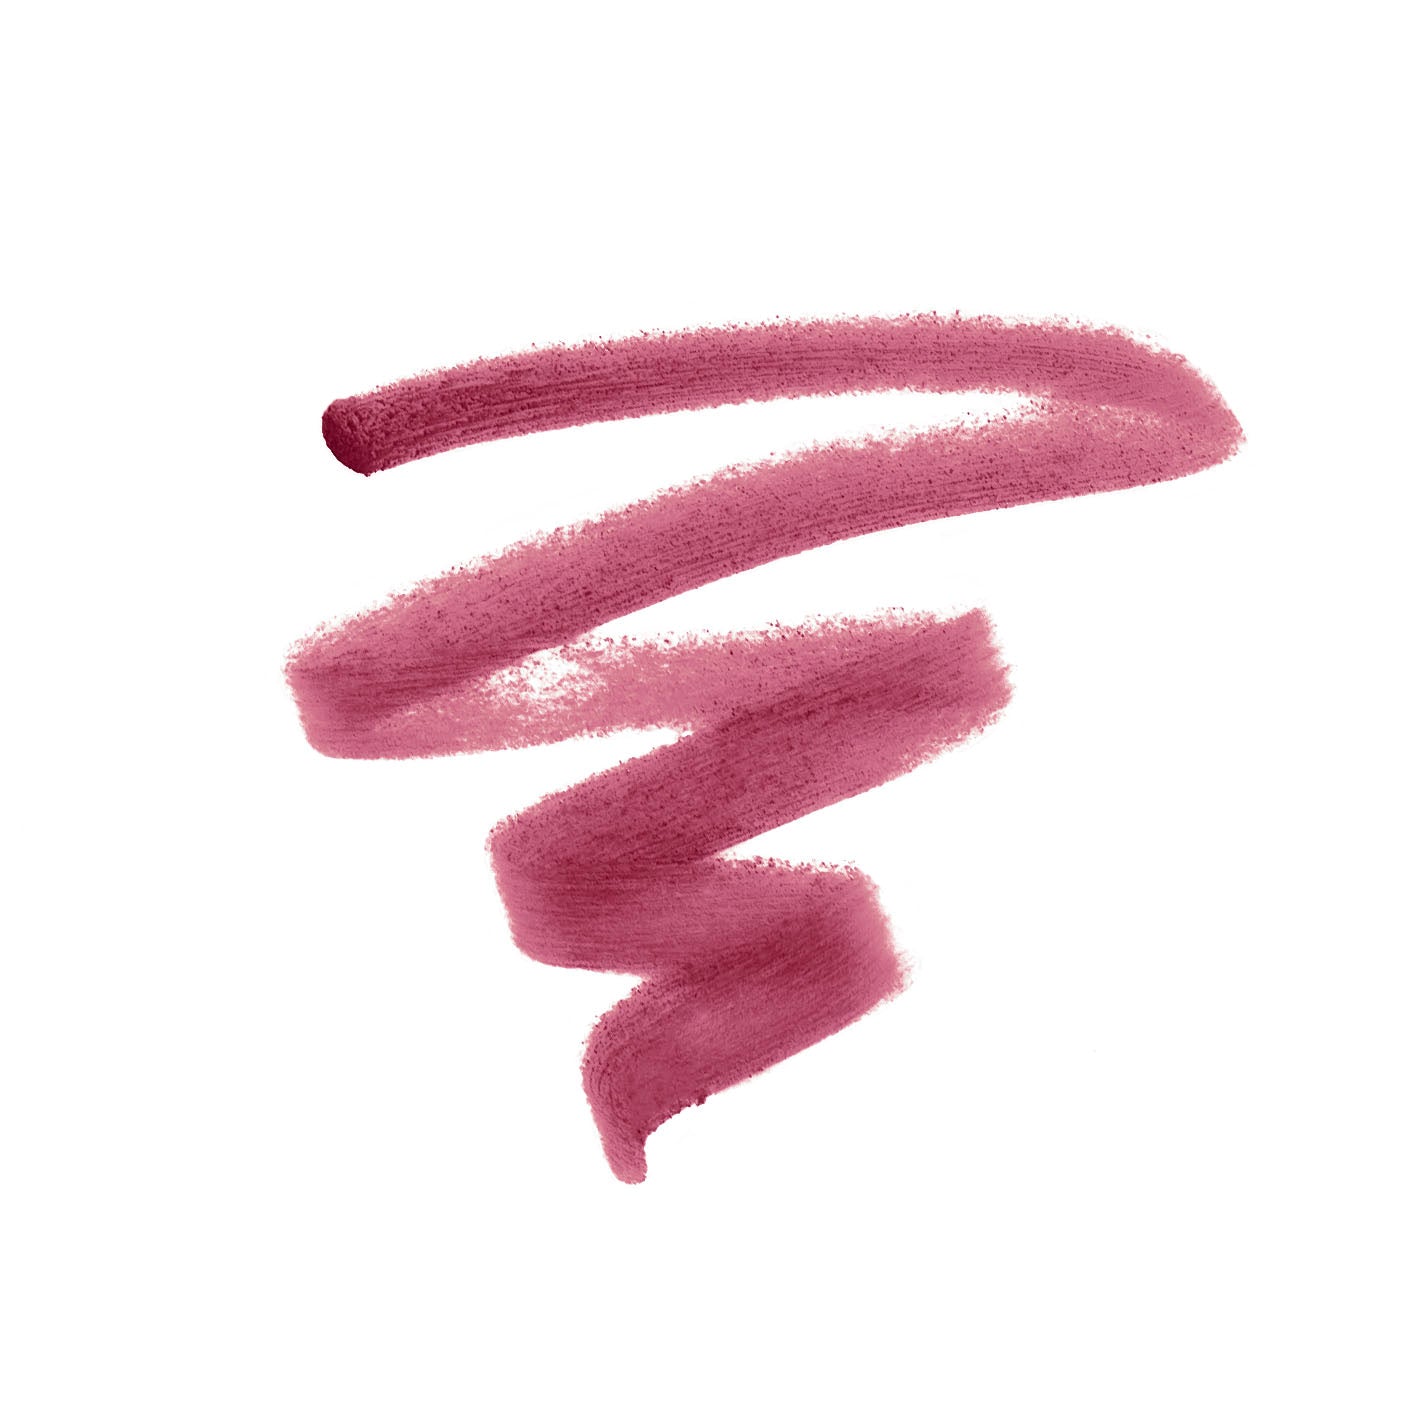 Jane Iredale's Lip Pencil - shade Warm Rose - rosy pink